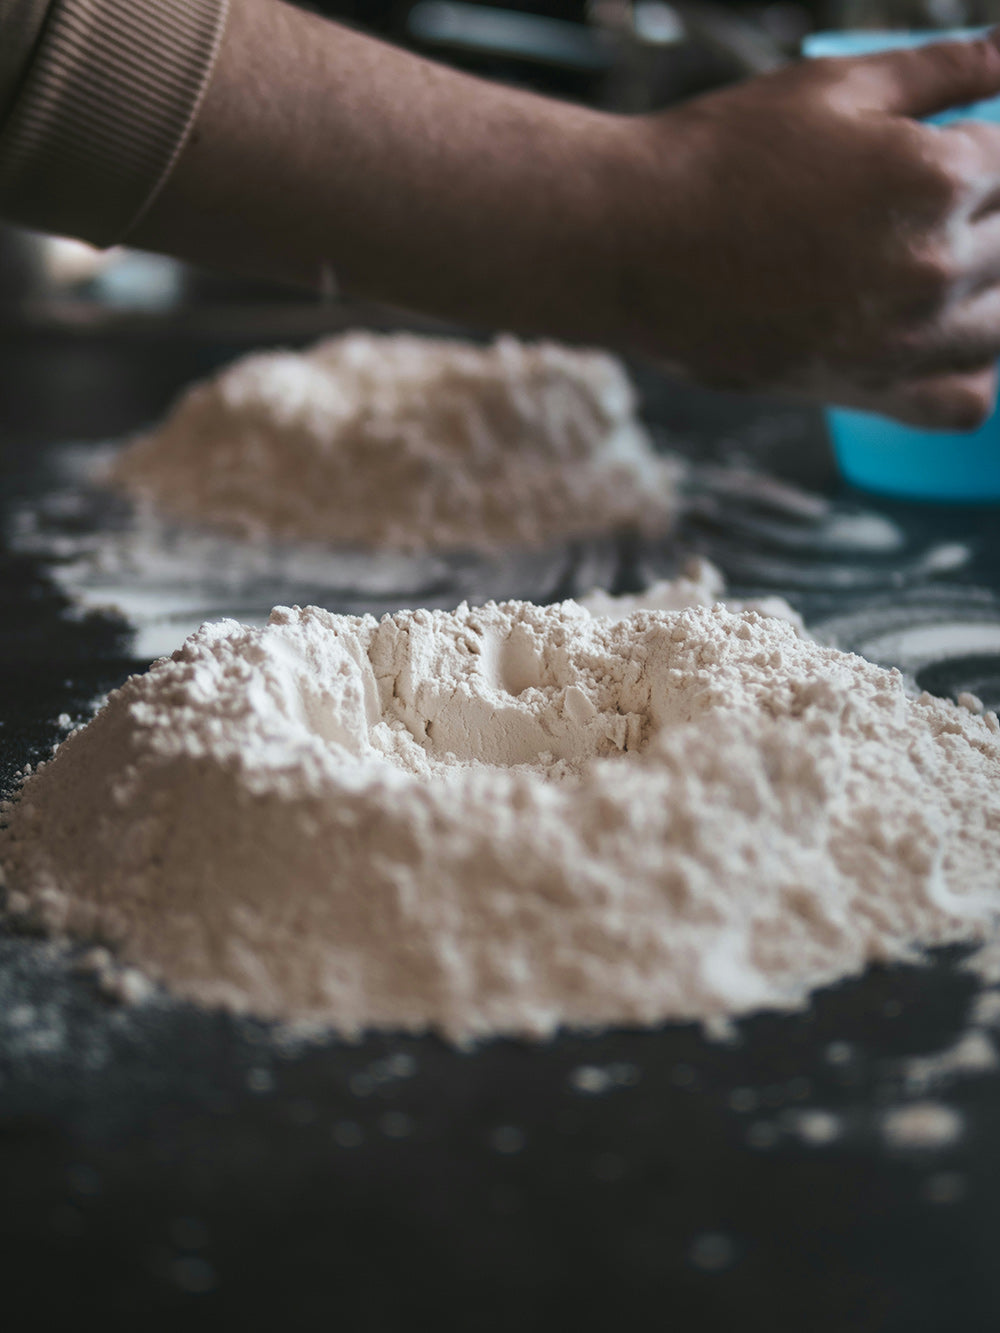 Flour Fortification, what is it and why does it exist?